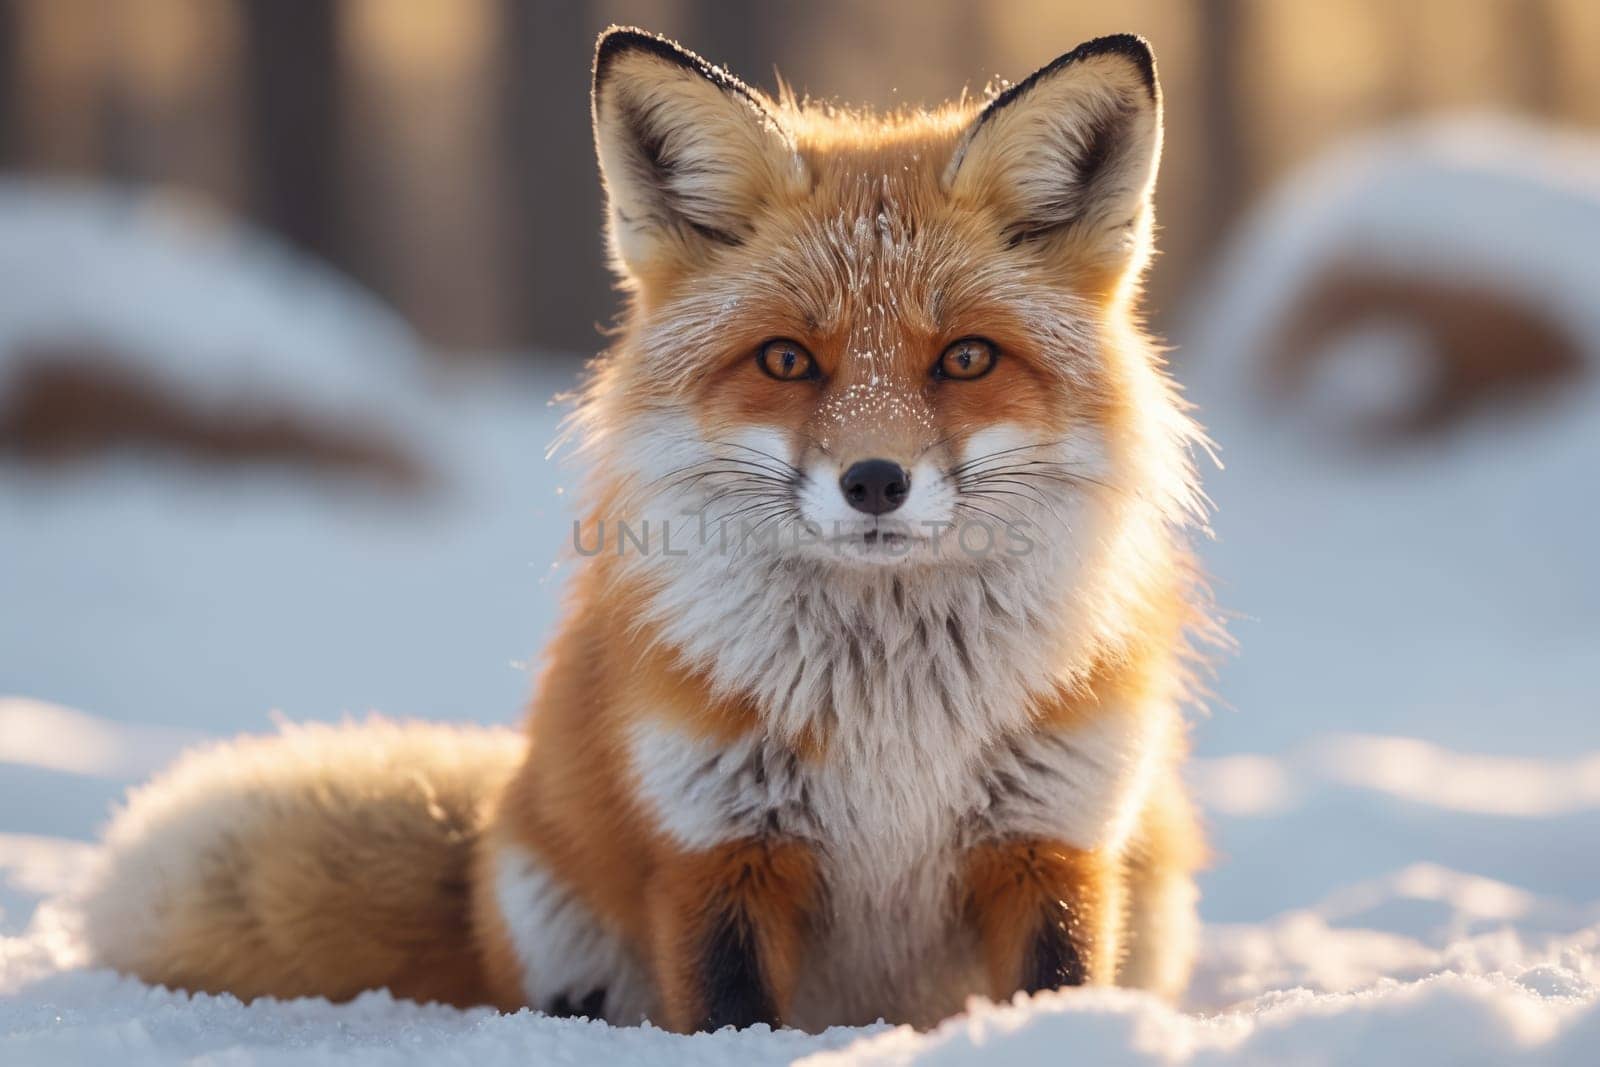 Amid a snowy backdrop, the vibrant fur of a red fox blends seamlessly in its wintry habitat.